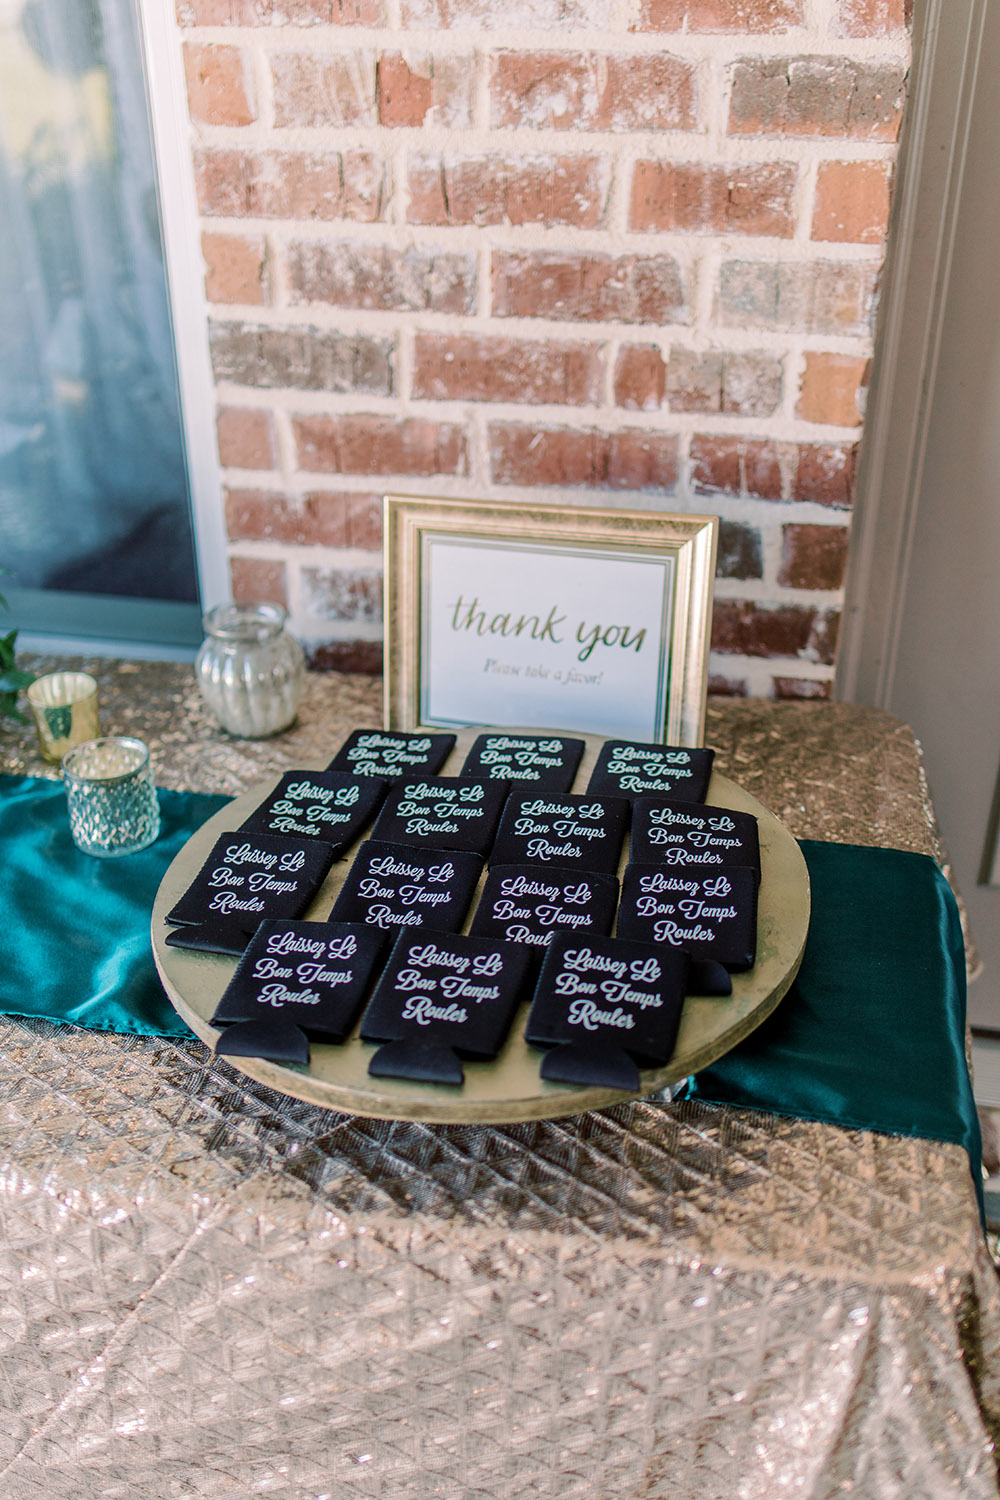 Display your favors, such as these personalized koozies that guests can use at the reception and then take home, at the entrance to the reception. Photo: Ashley Kristen Photography